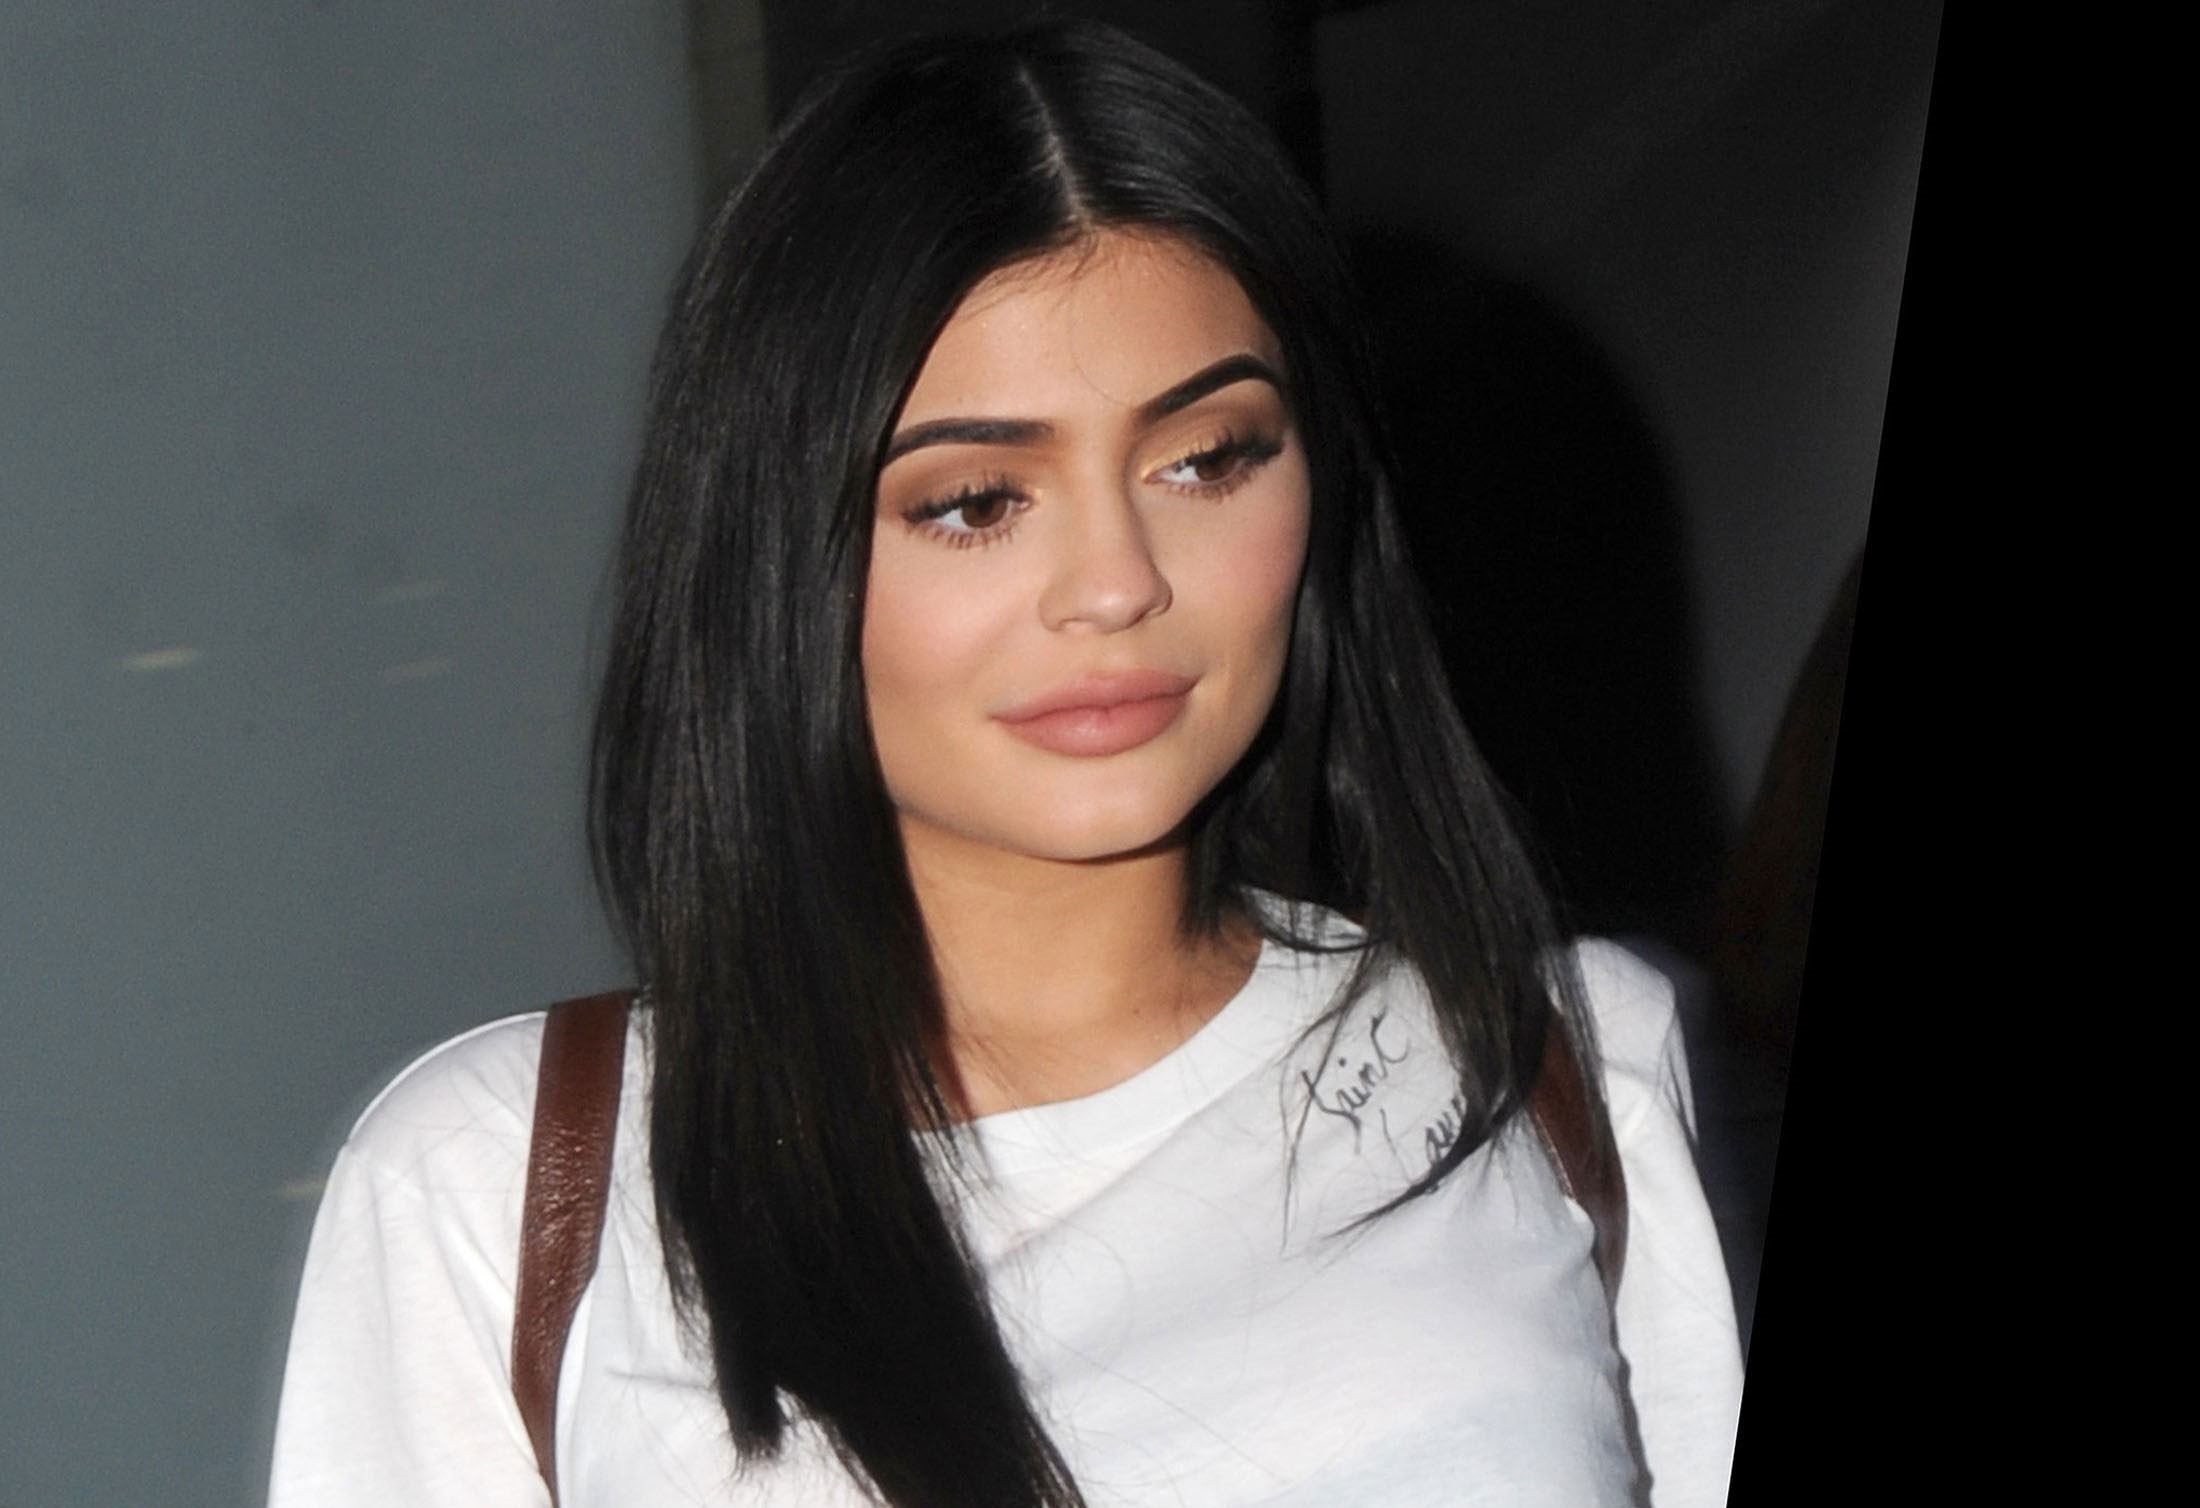 Kylie Jenner’s Money Maker Lips May Suffer While She’s Pregnant